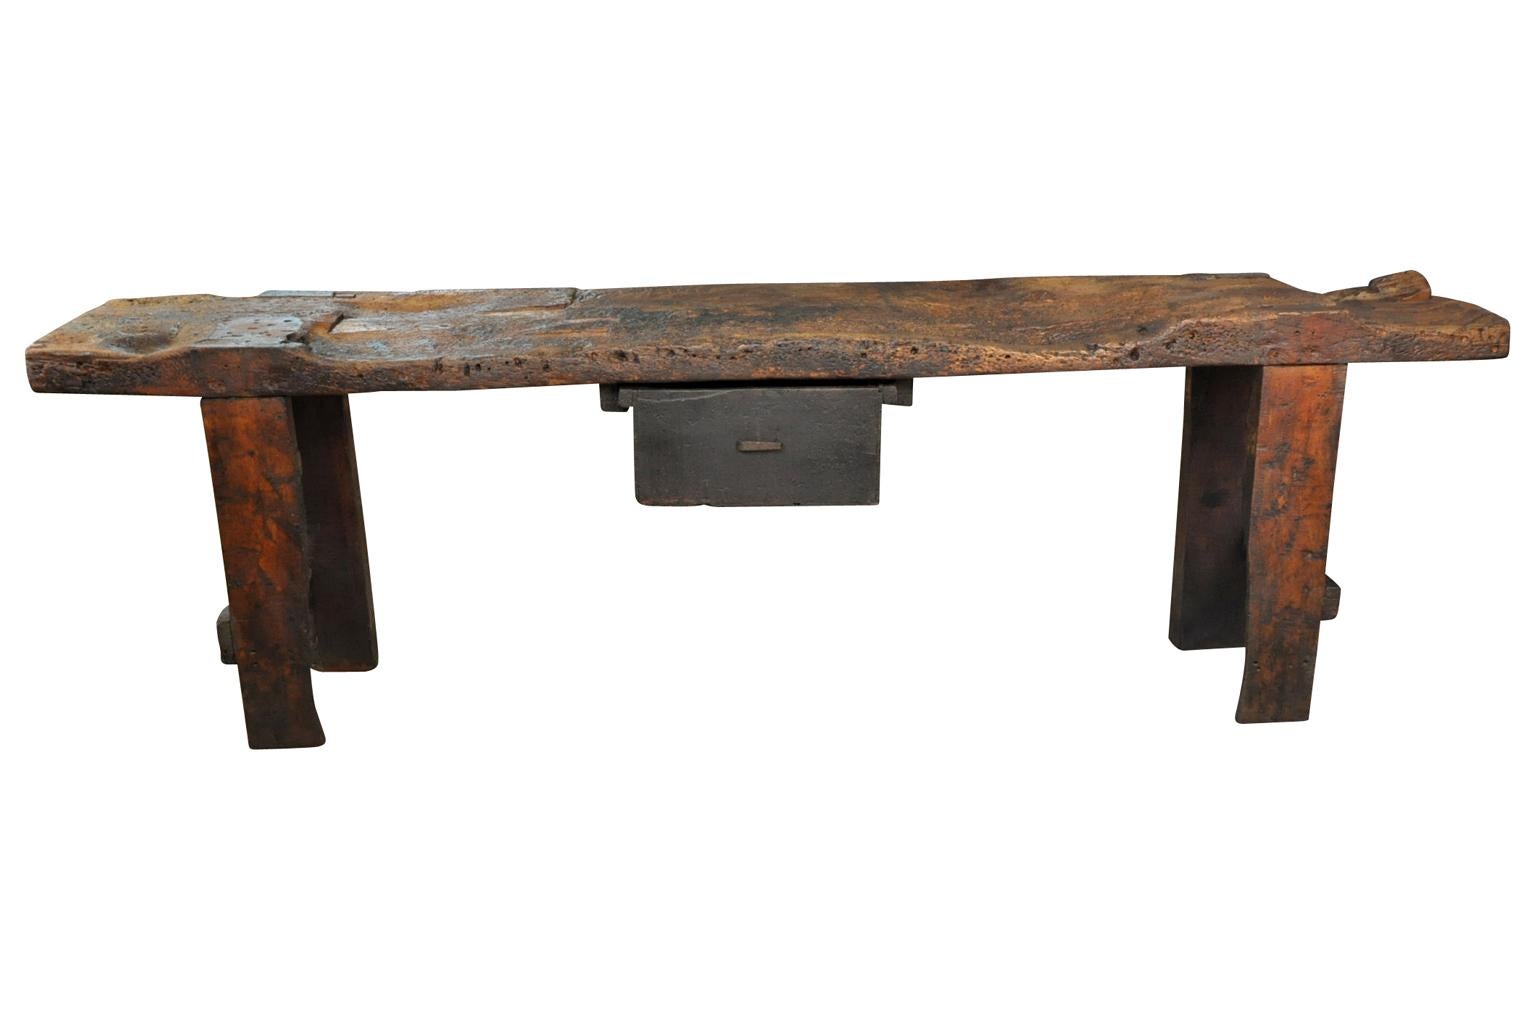 A terrific mid-19th century work table, console table from the Catalan region of Spain. Sturdily constructed from pine and beech wood. The top has wonderful character great patina.